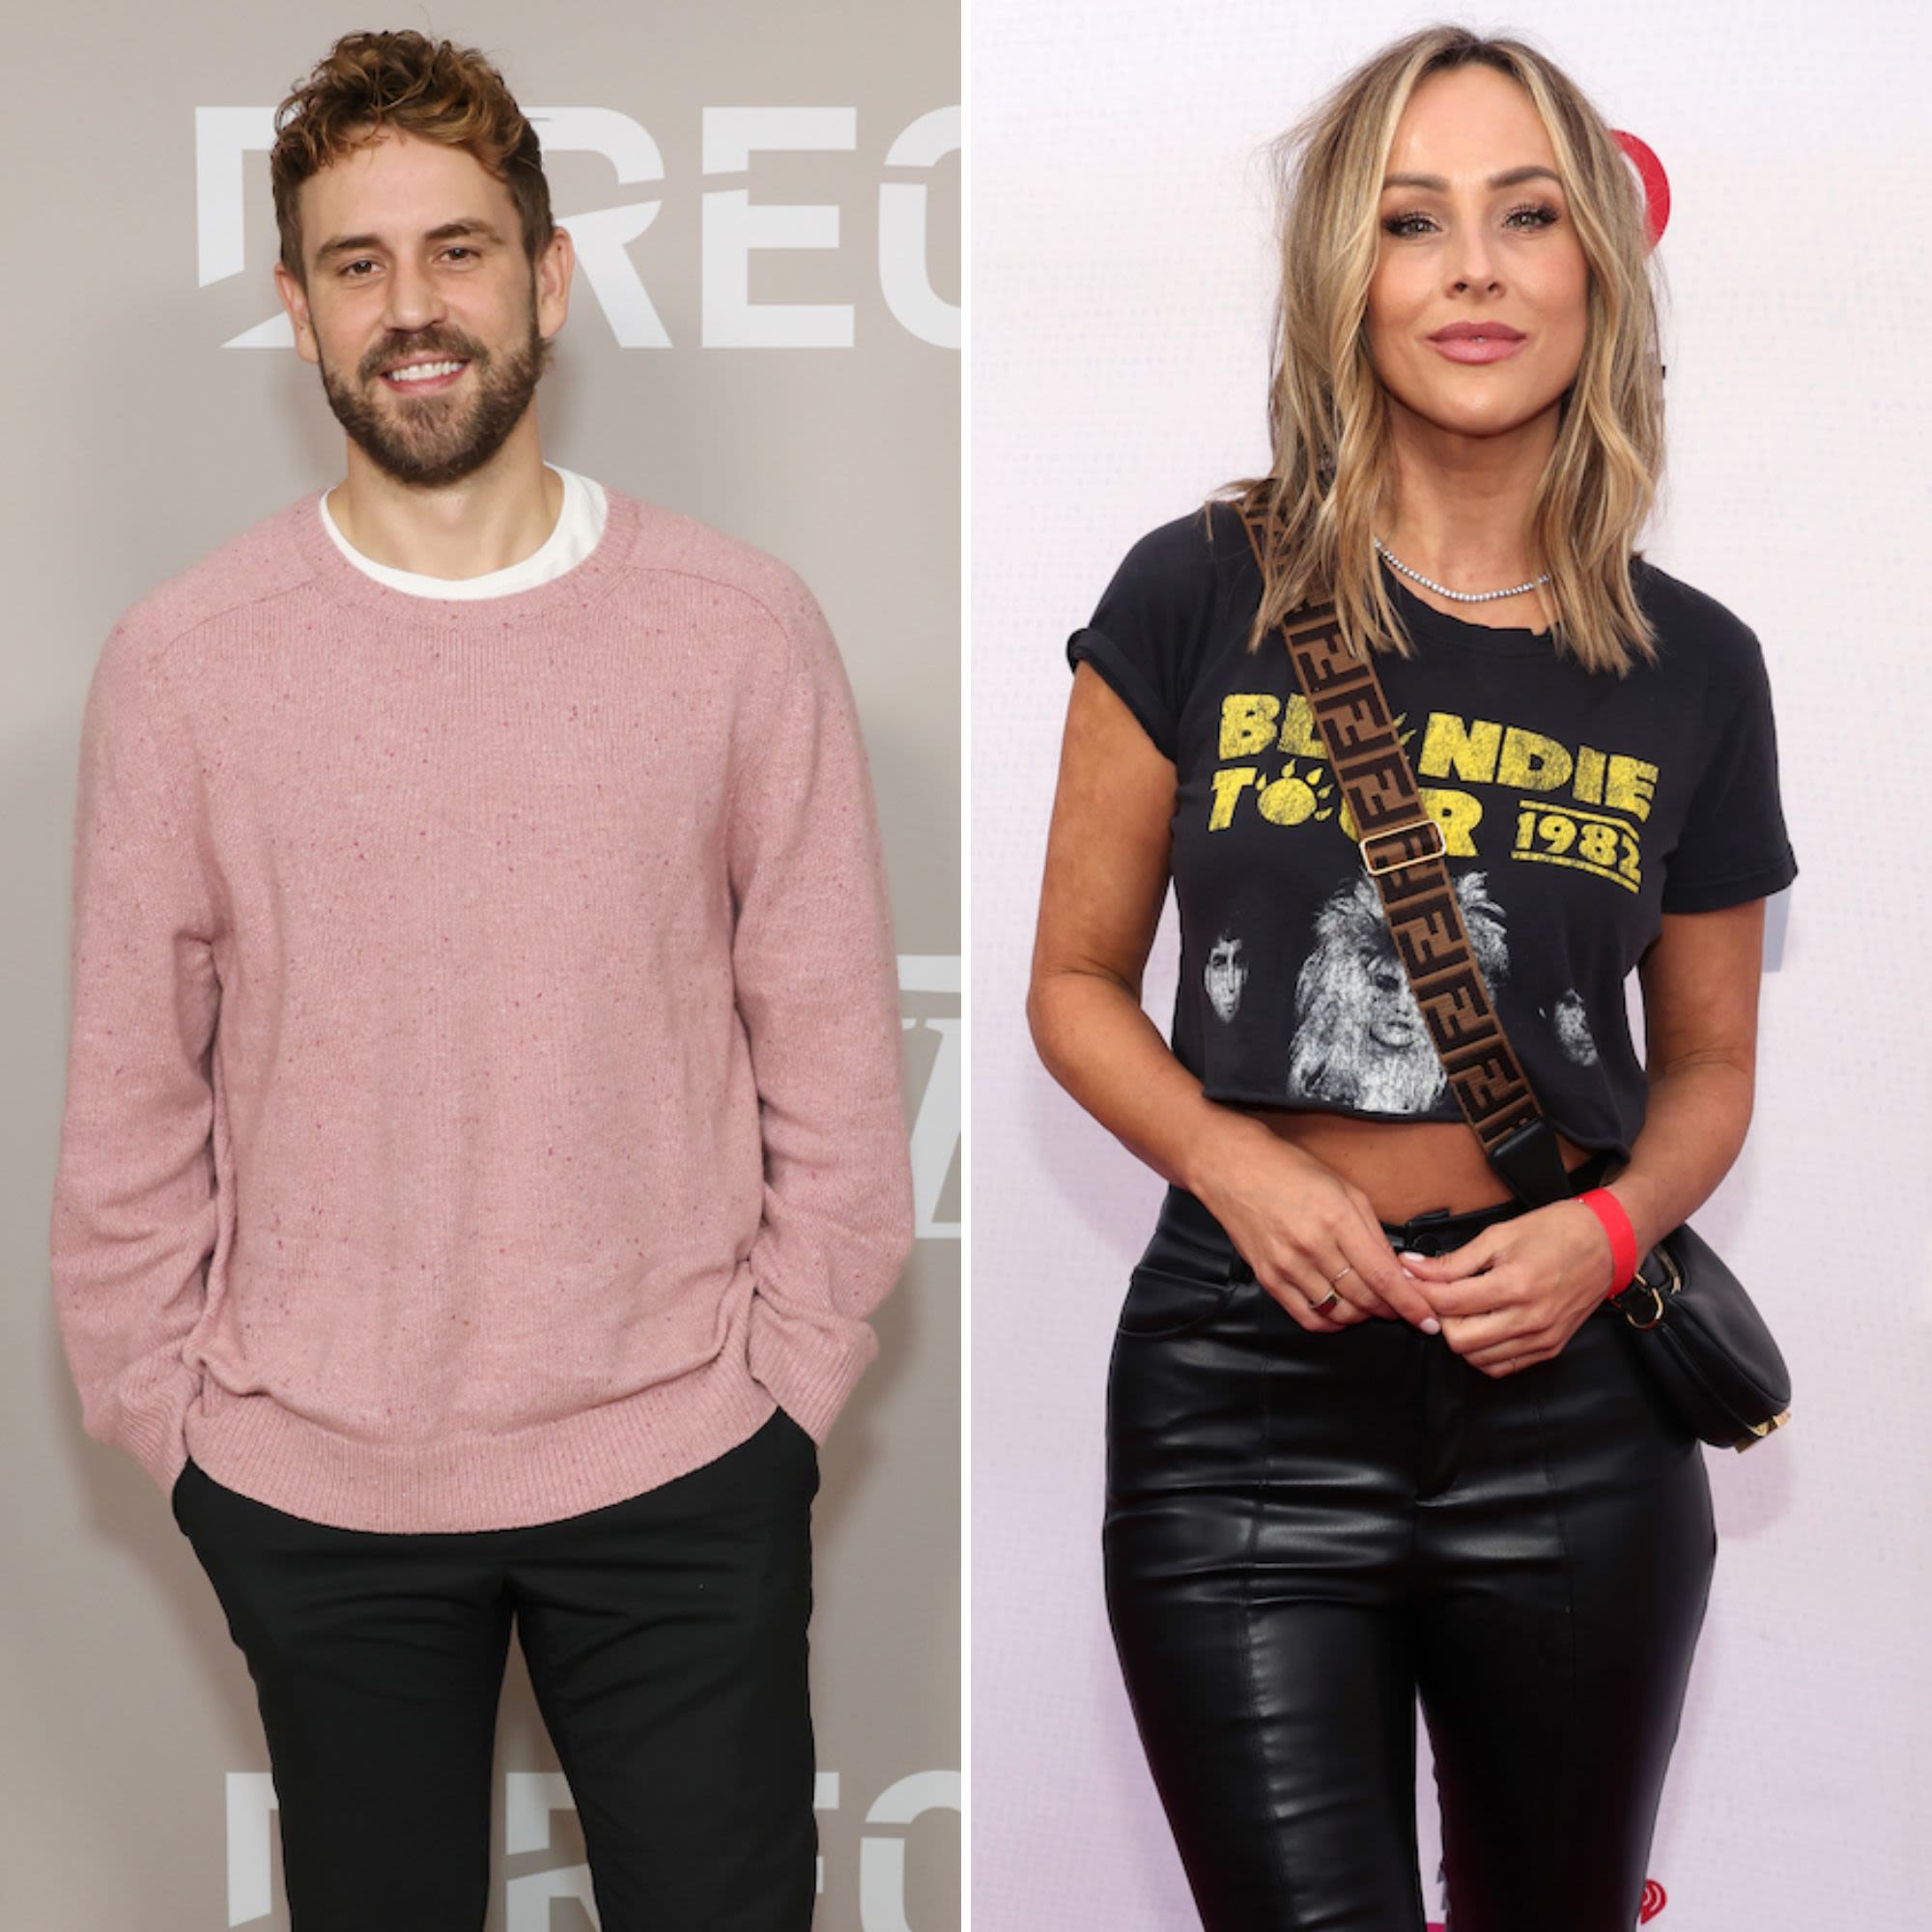 Feud Alert! The Bachelorette’s Clare Crawley Claps Back at Nick Viall After He Disses Her on Podcast